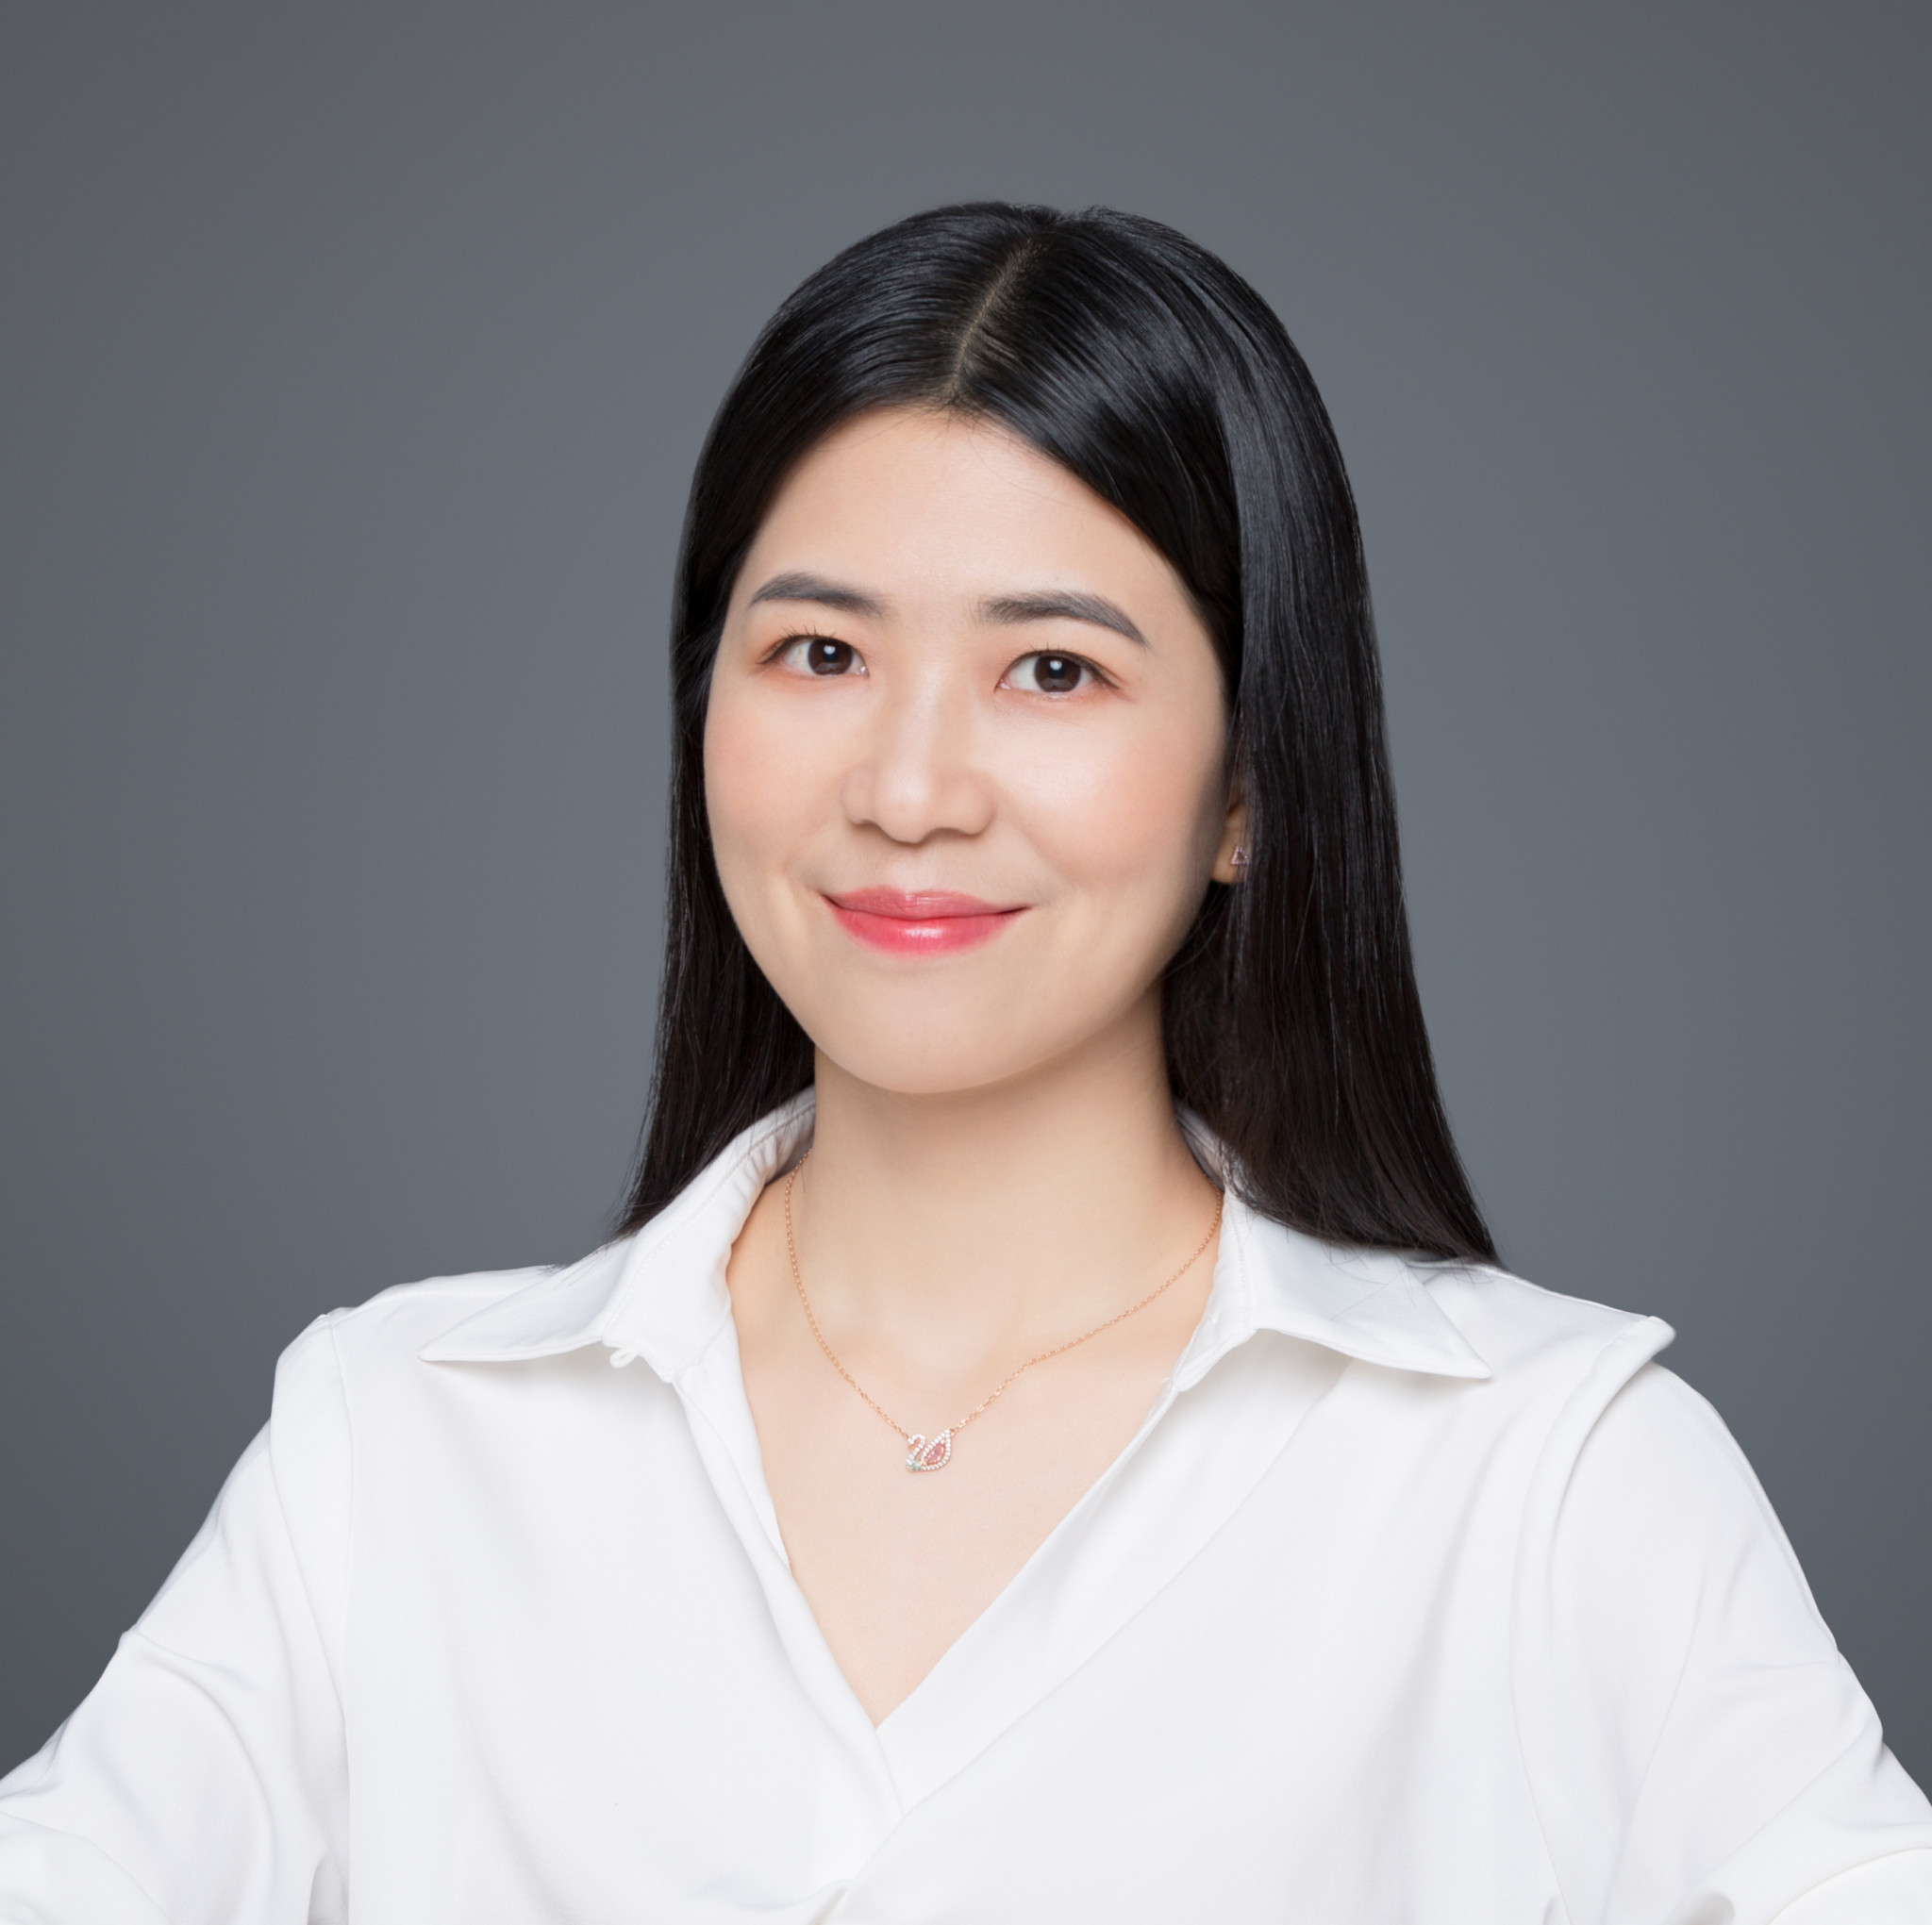 Emily graduated from Chongqing University of Technology with a master's degree. Emily focuses on automotive electronics cross-field compliance and certification solutions.